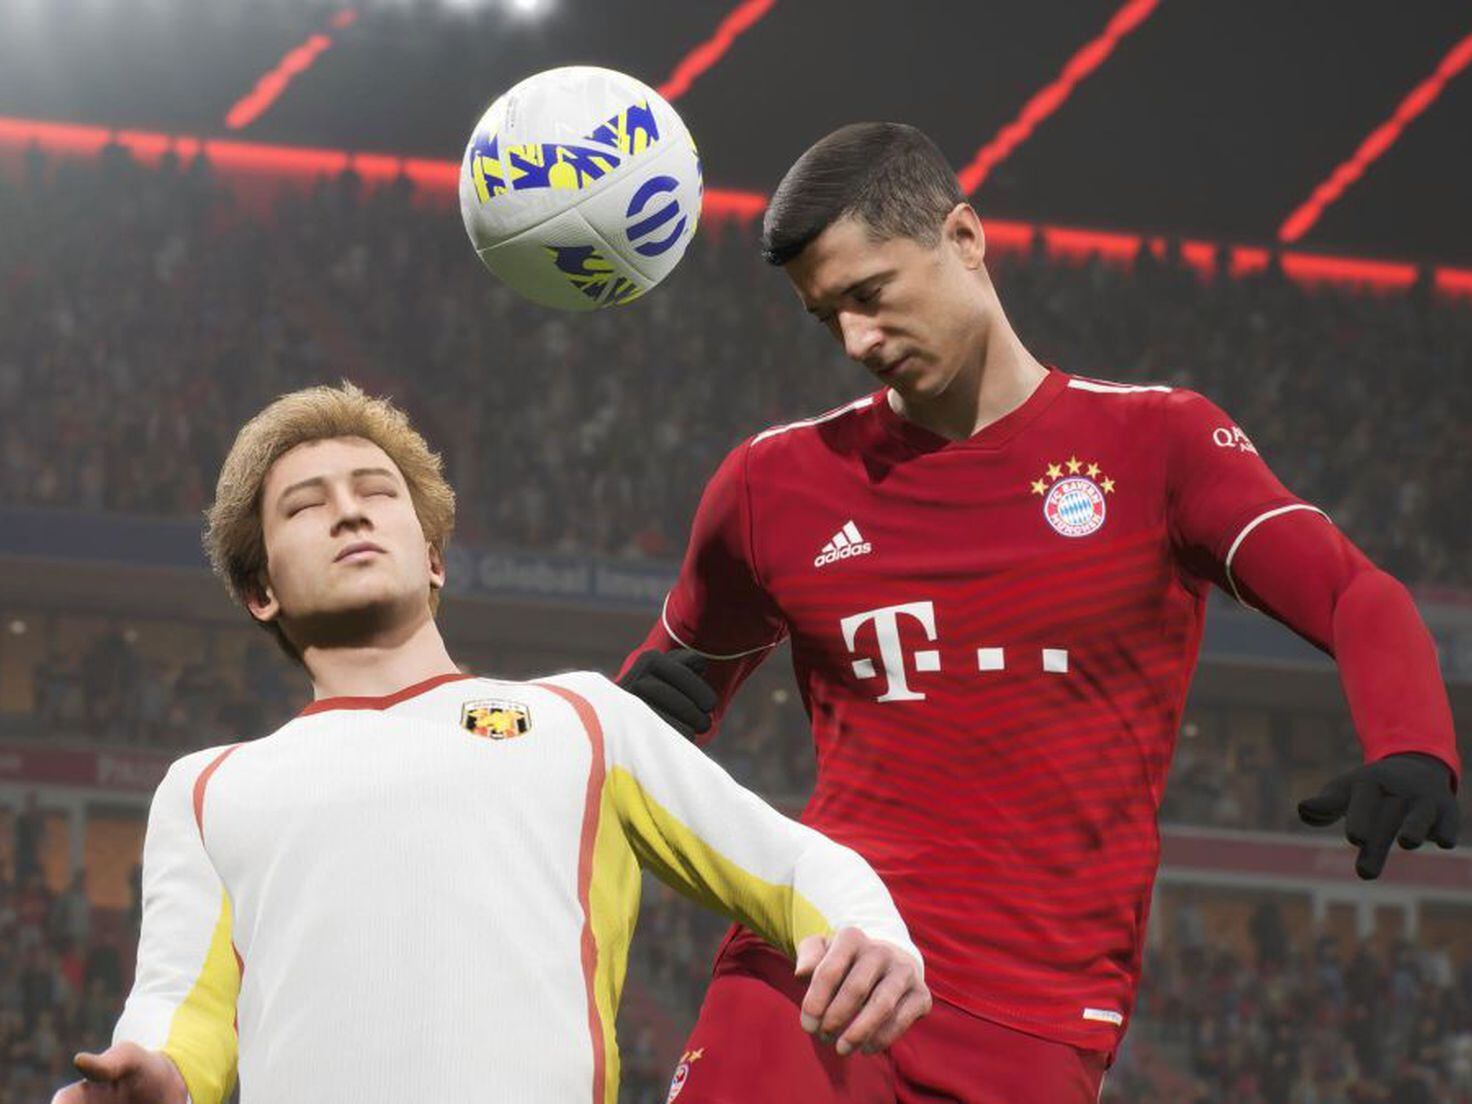 Konami on eFootball - Paid DLCs, Cross-play Rules and Online Mode Changes